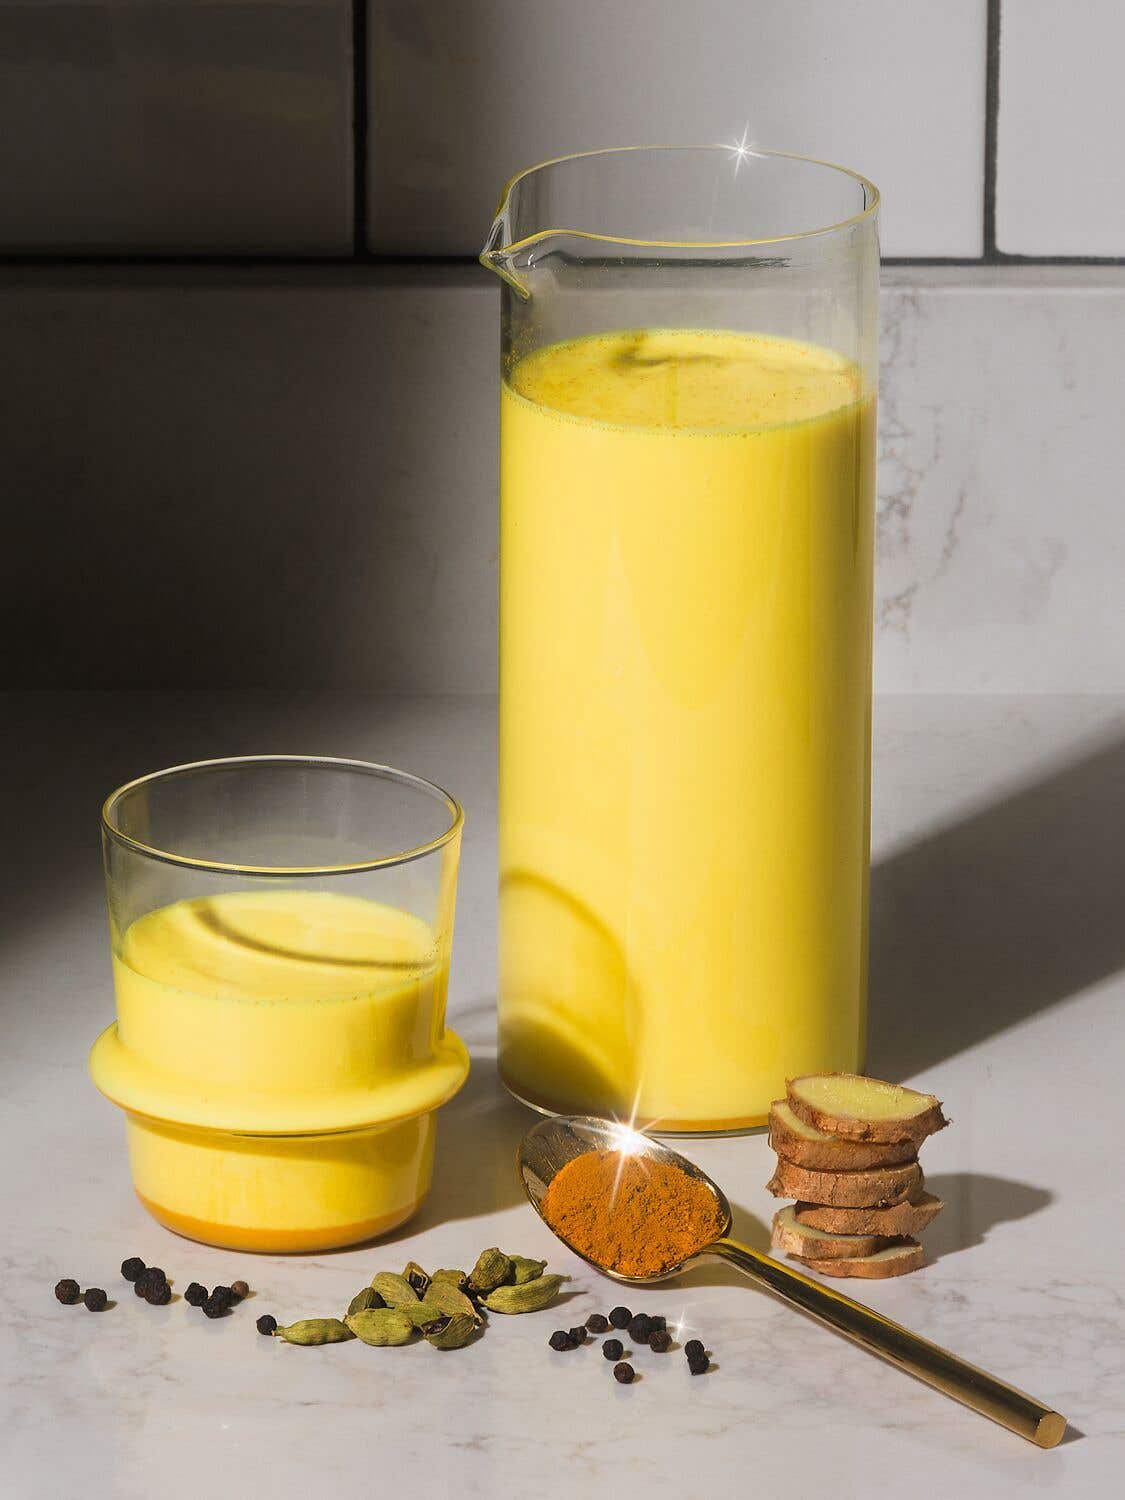 This Blender Could Actually Make You Healthier (Yes, Really)